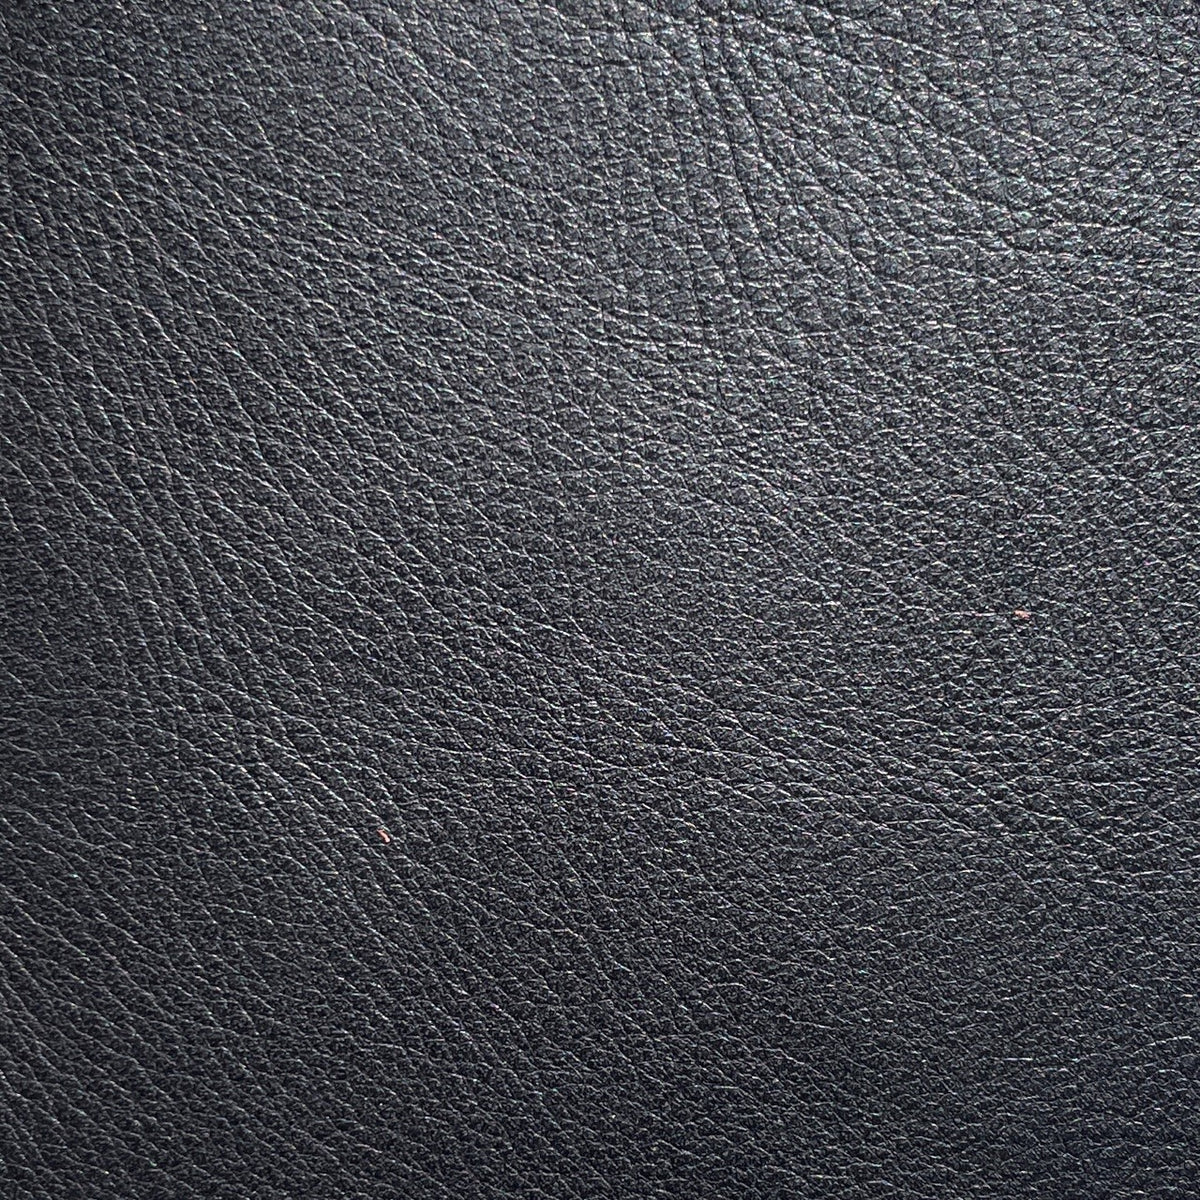 Olympia Cow Side | Black | 1.5 mm | 21 sq.ft | From $260 ea.